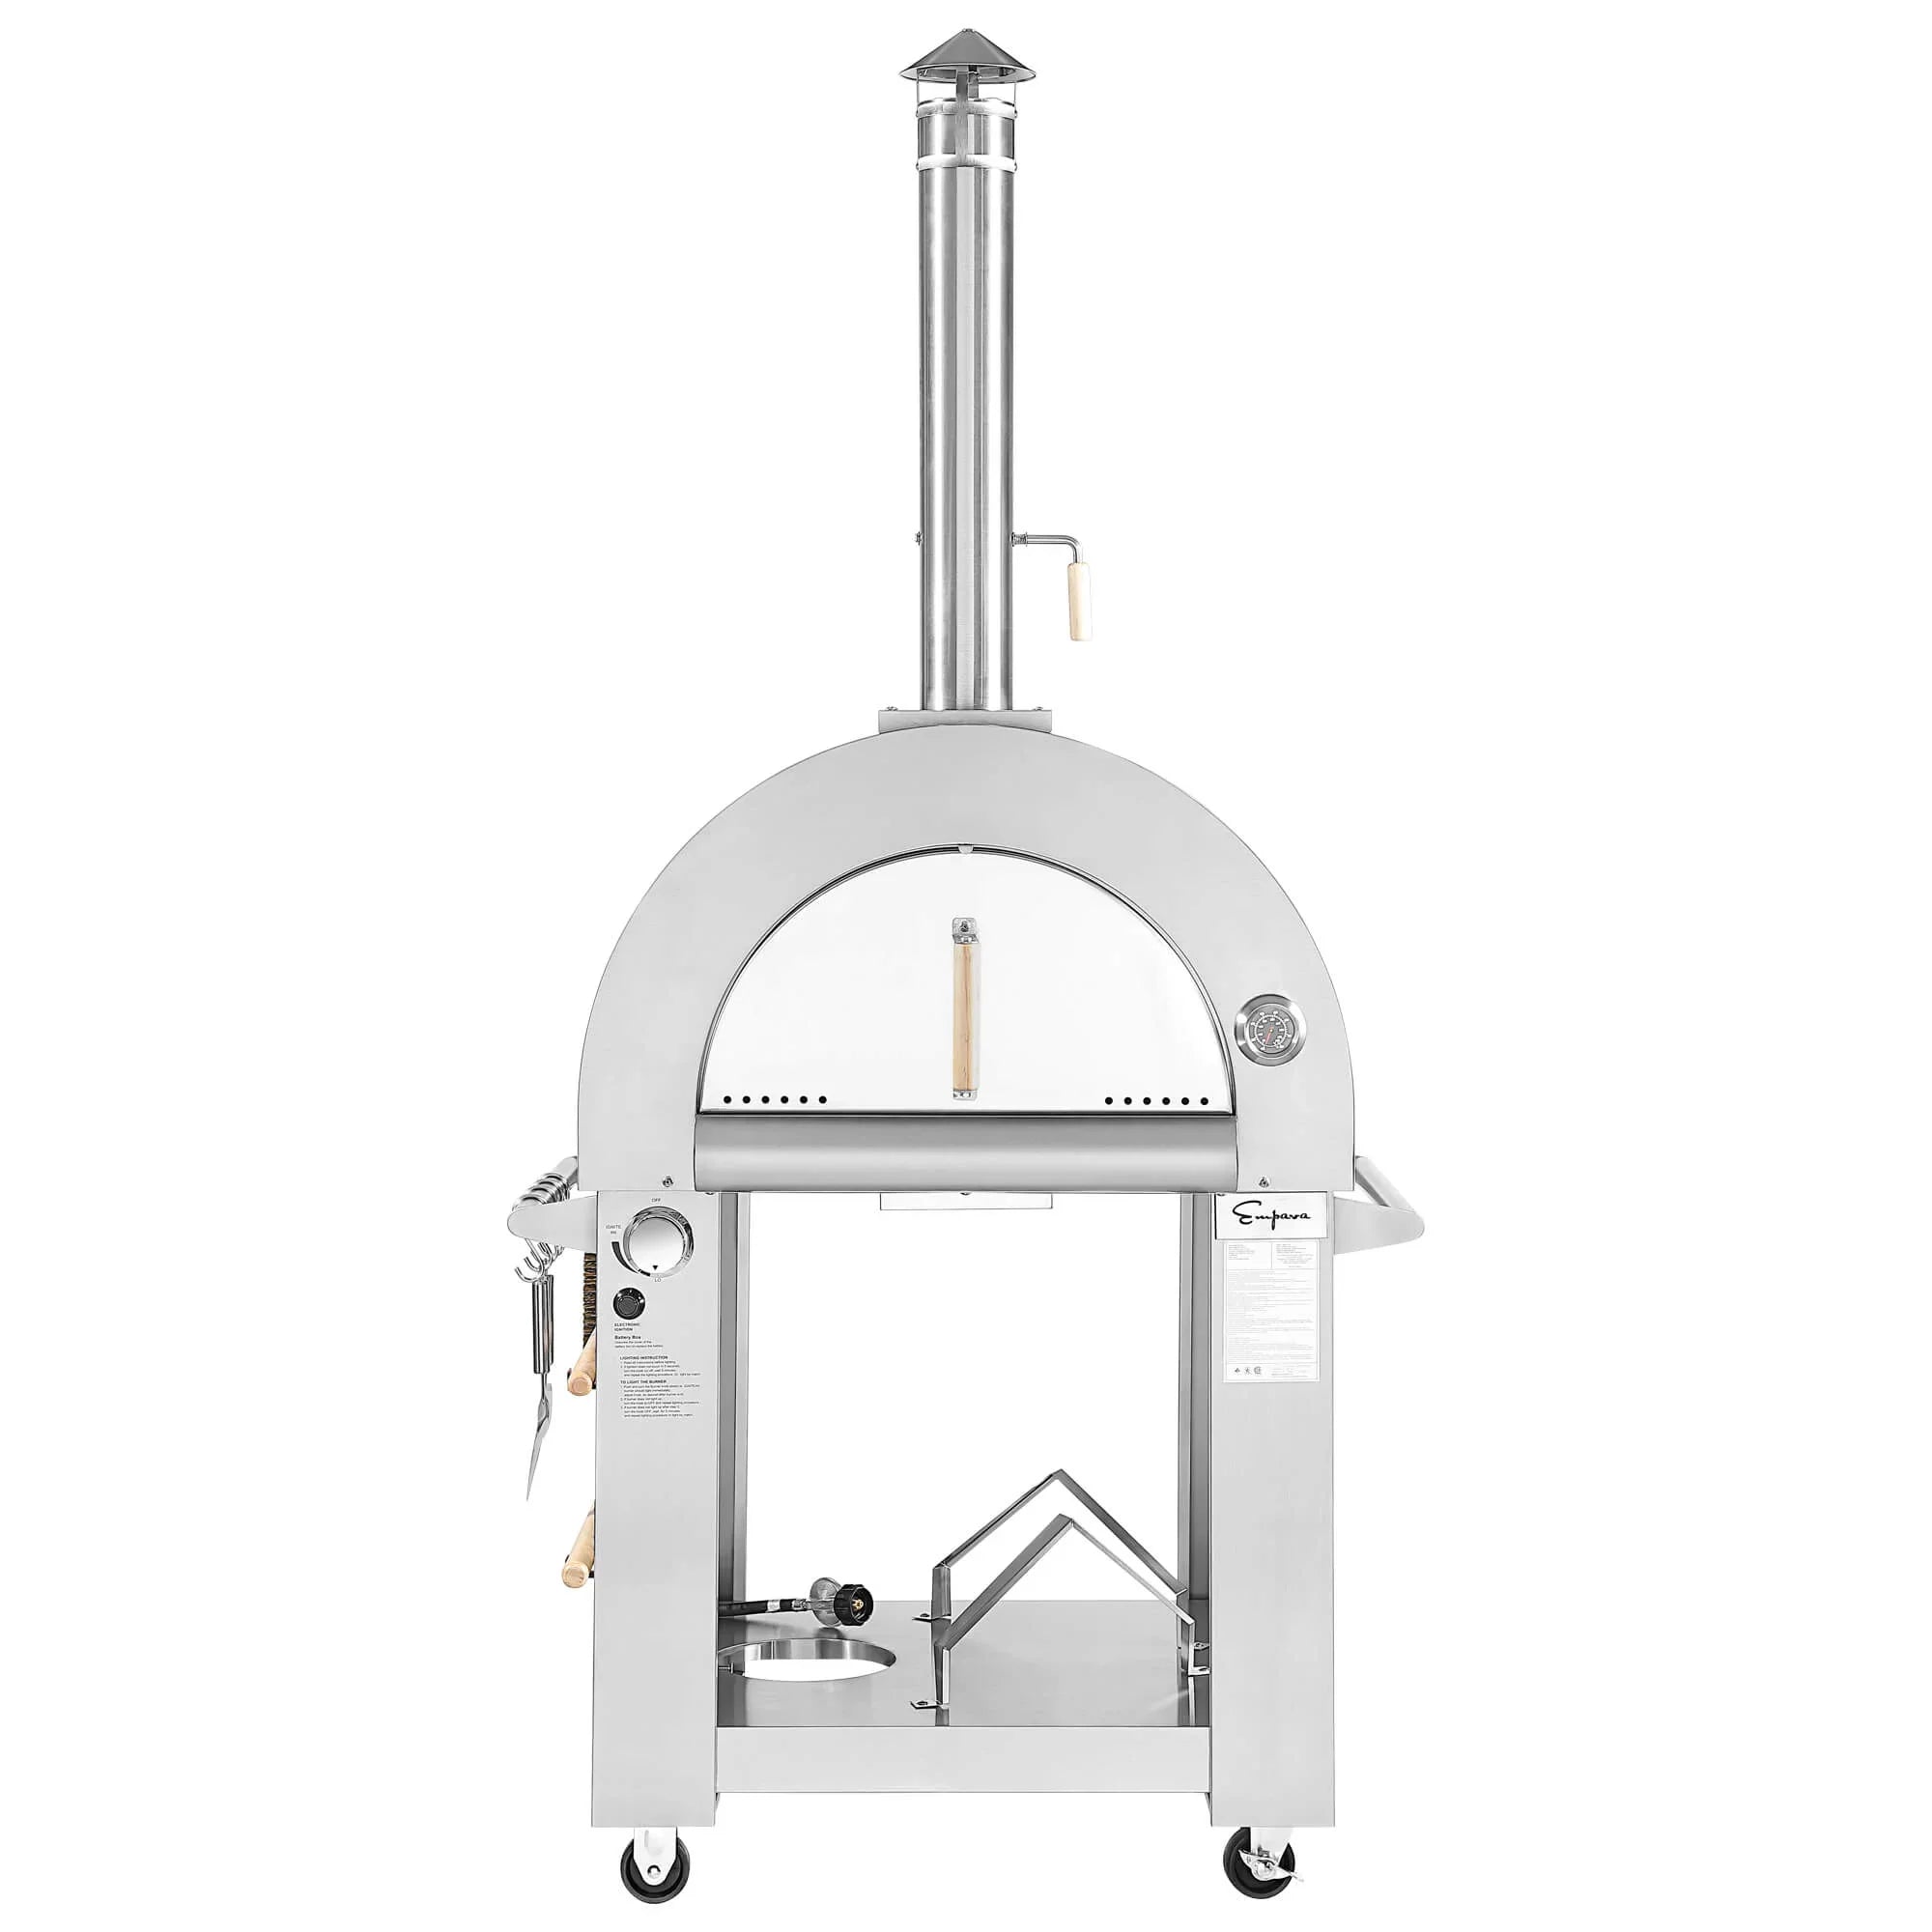 Empava Outdoor Propane Convertible Wood Fired Pizza Oven in Stainless Steel (PG03) 